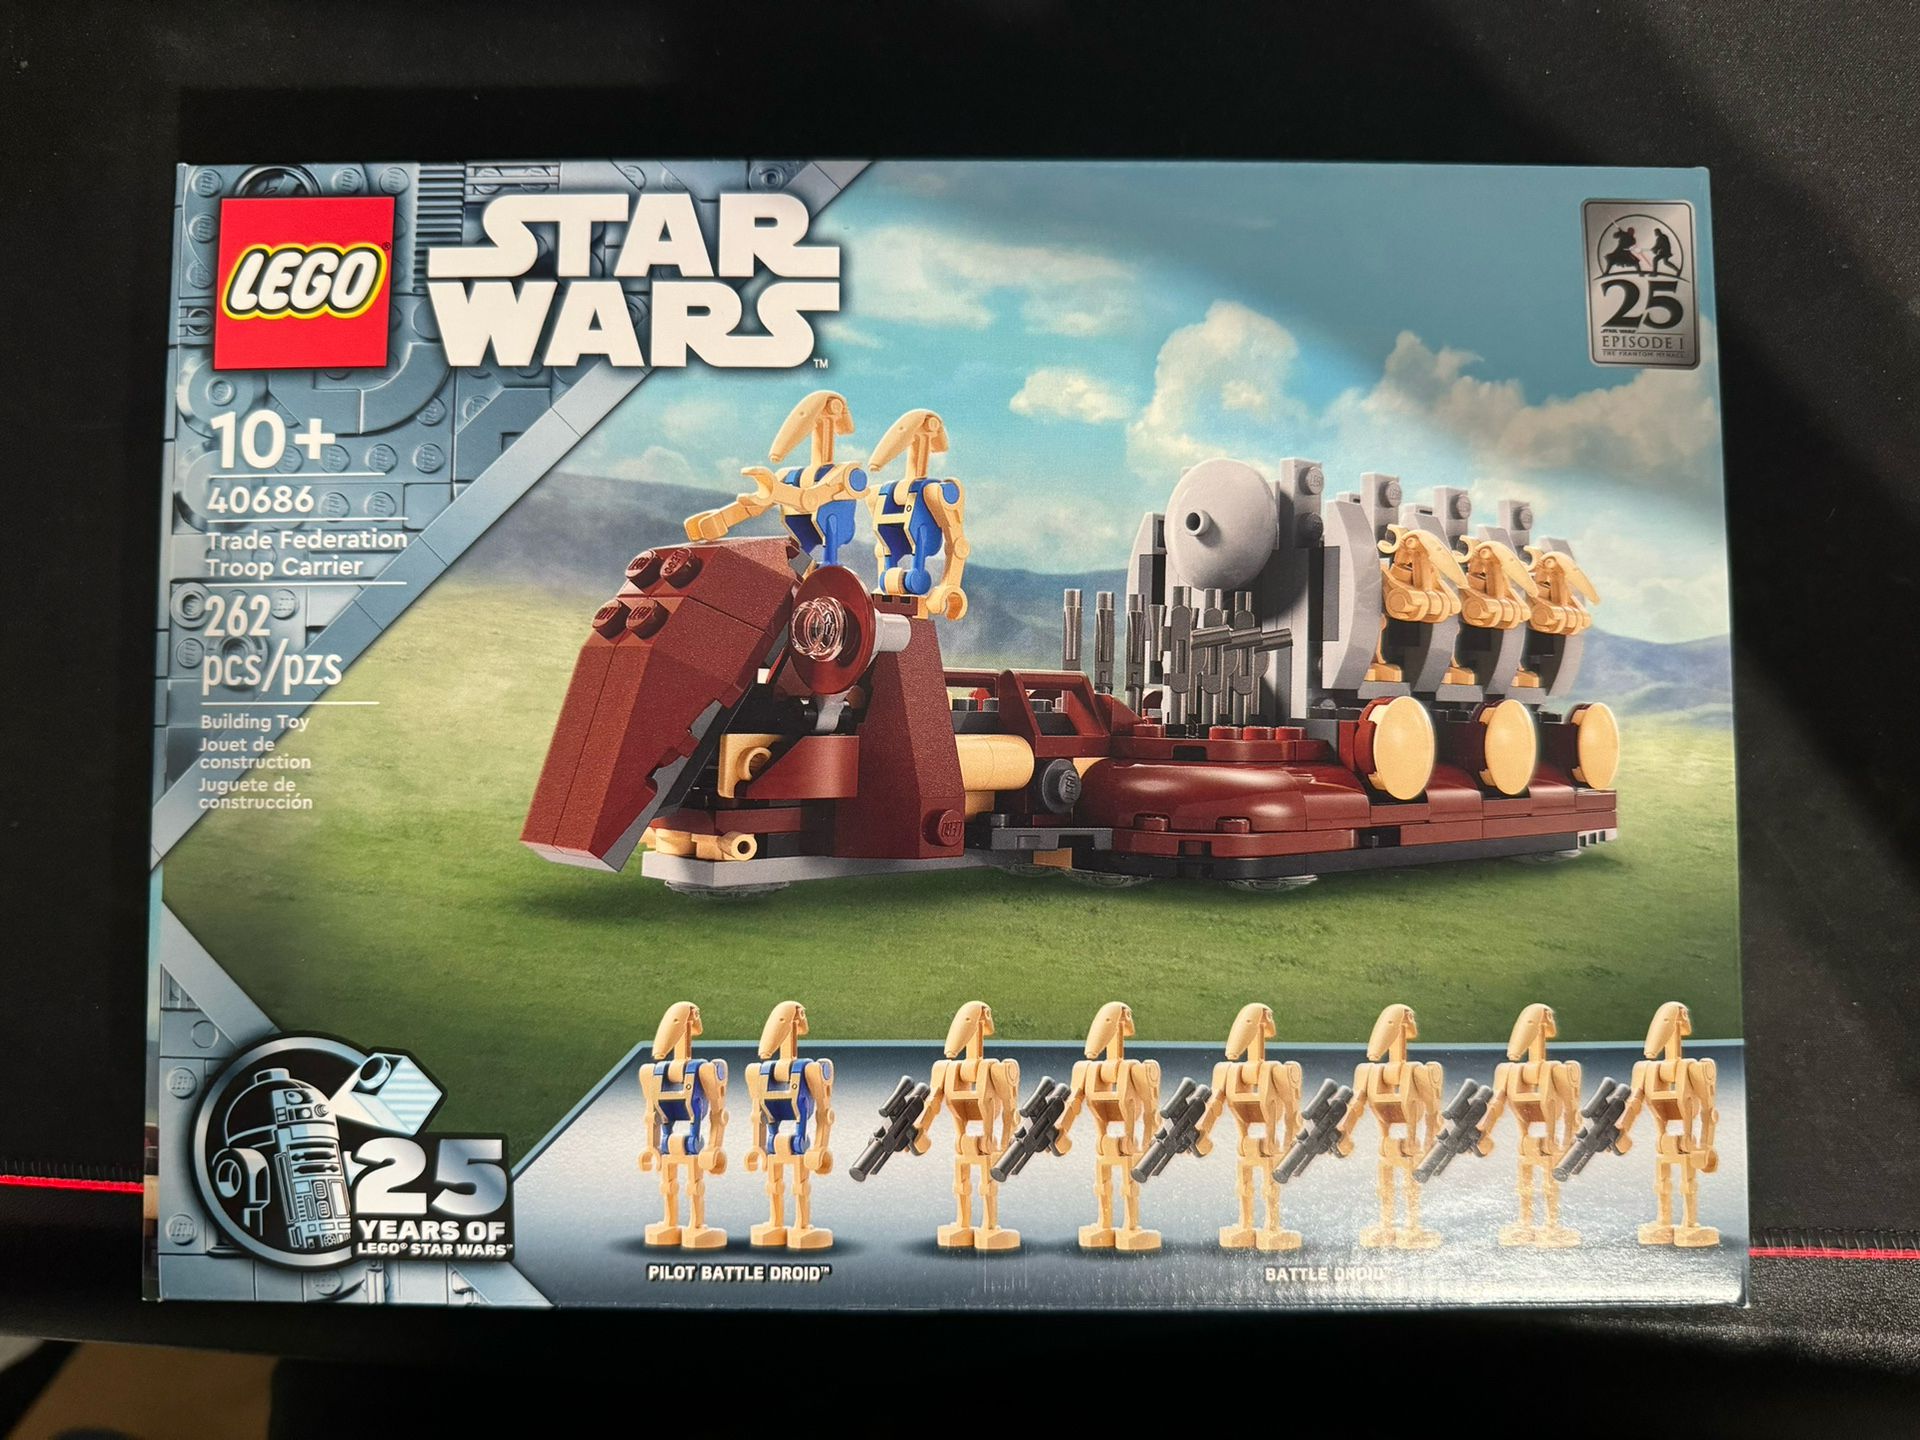 Lego Star Wars 25th Anniversary 40686 Droid Carrier and 30680 AAT Polybag GWP And Collectible Coin